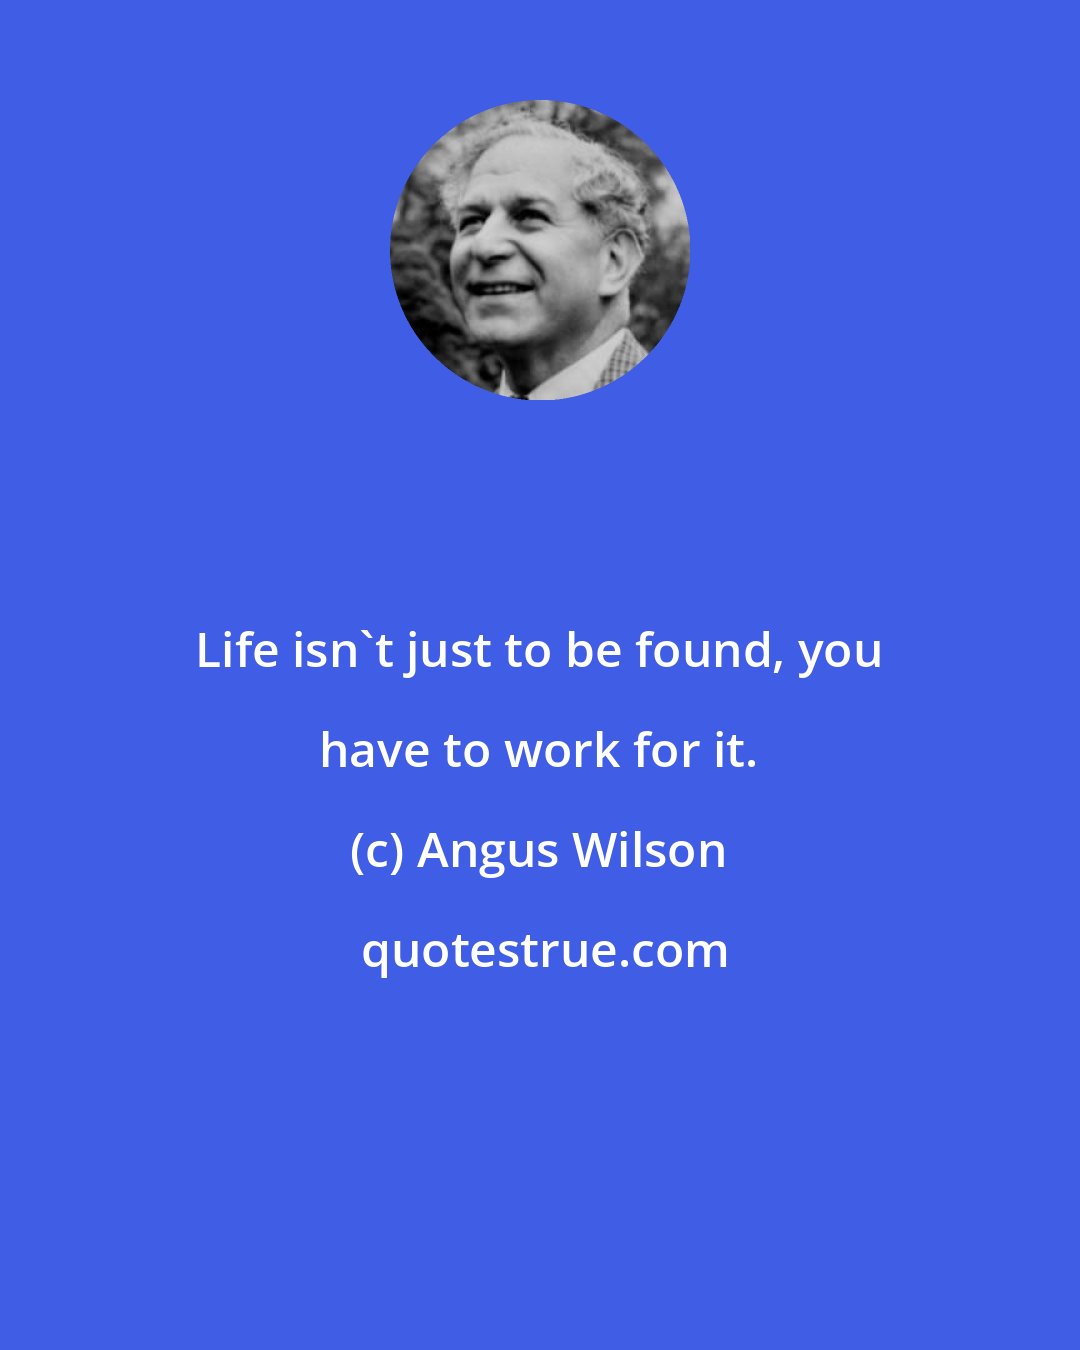 Angus Wilson: Life isn't just to be found, you have to work for it.